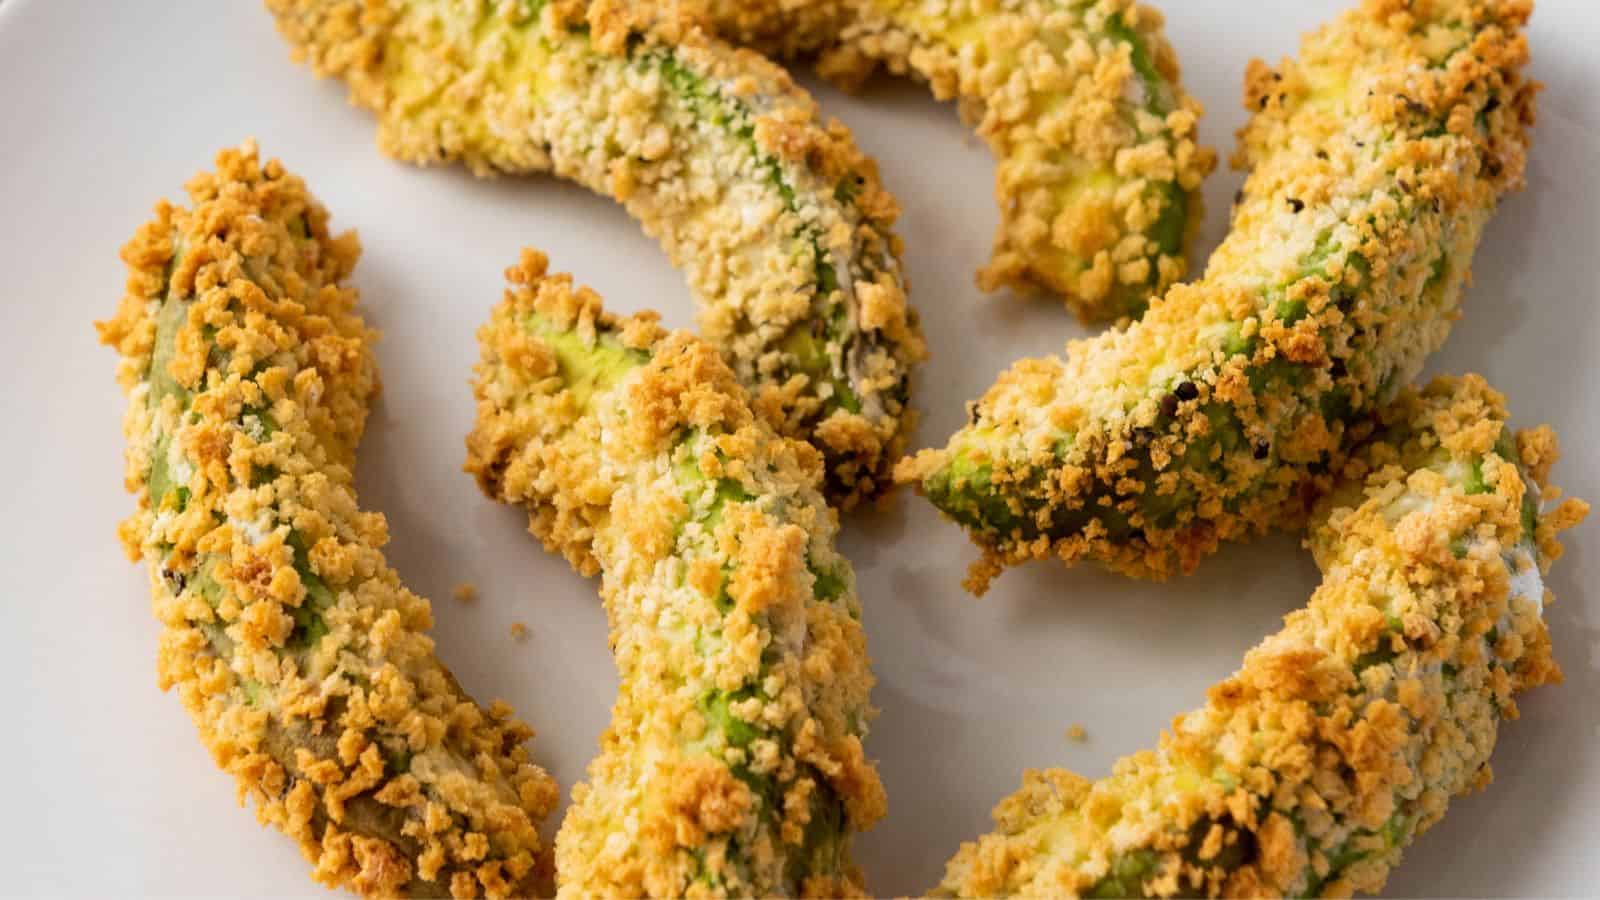 Close-up of crispy, breaded Air Fryer Avocado Fries on a white plate.